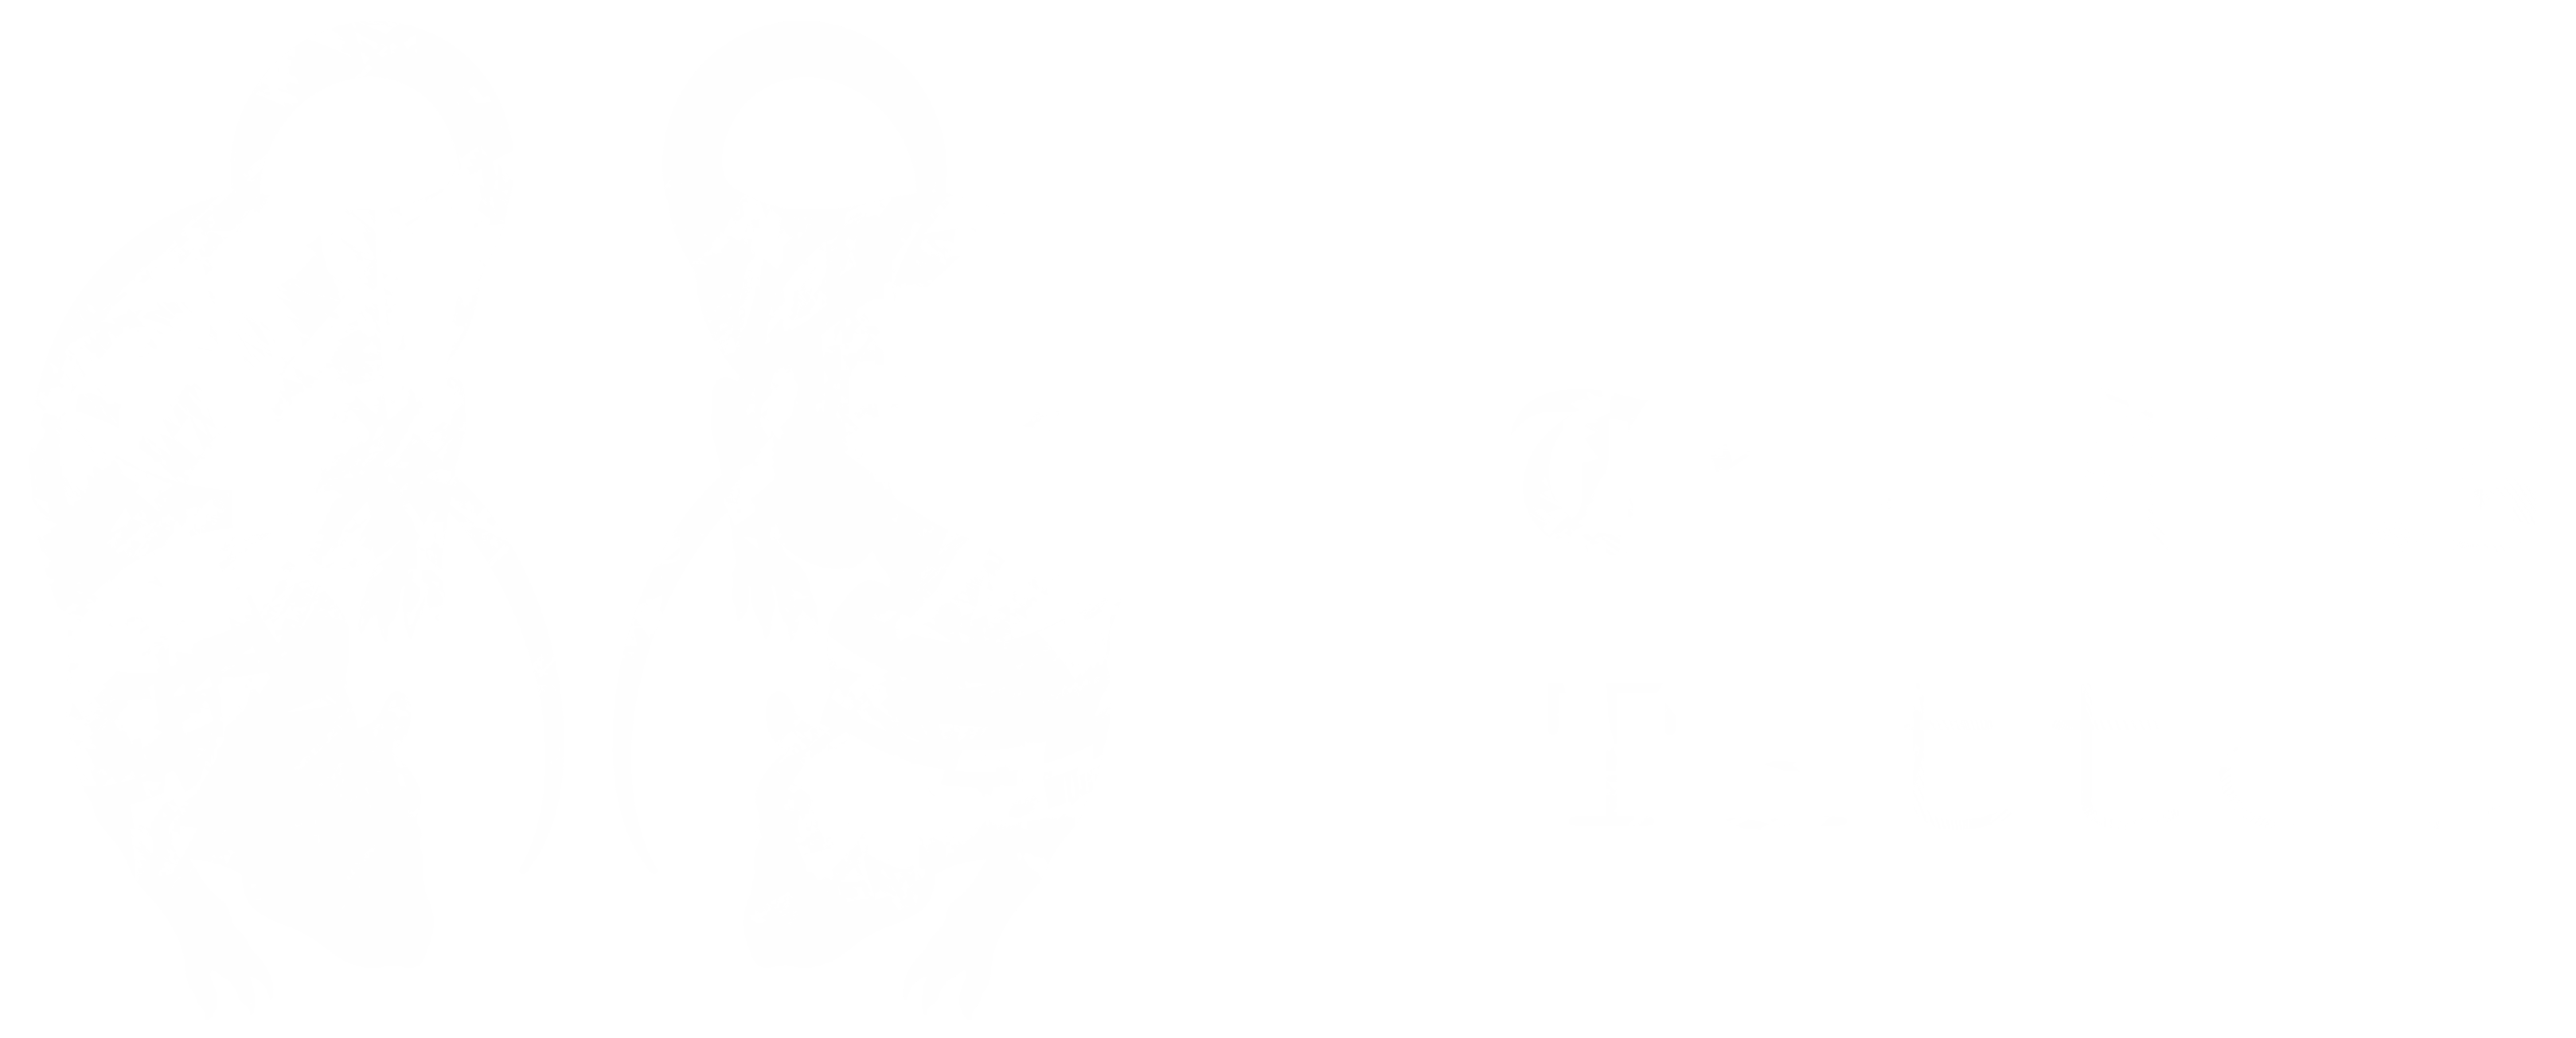 Two-Rats